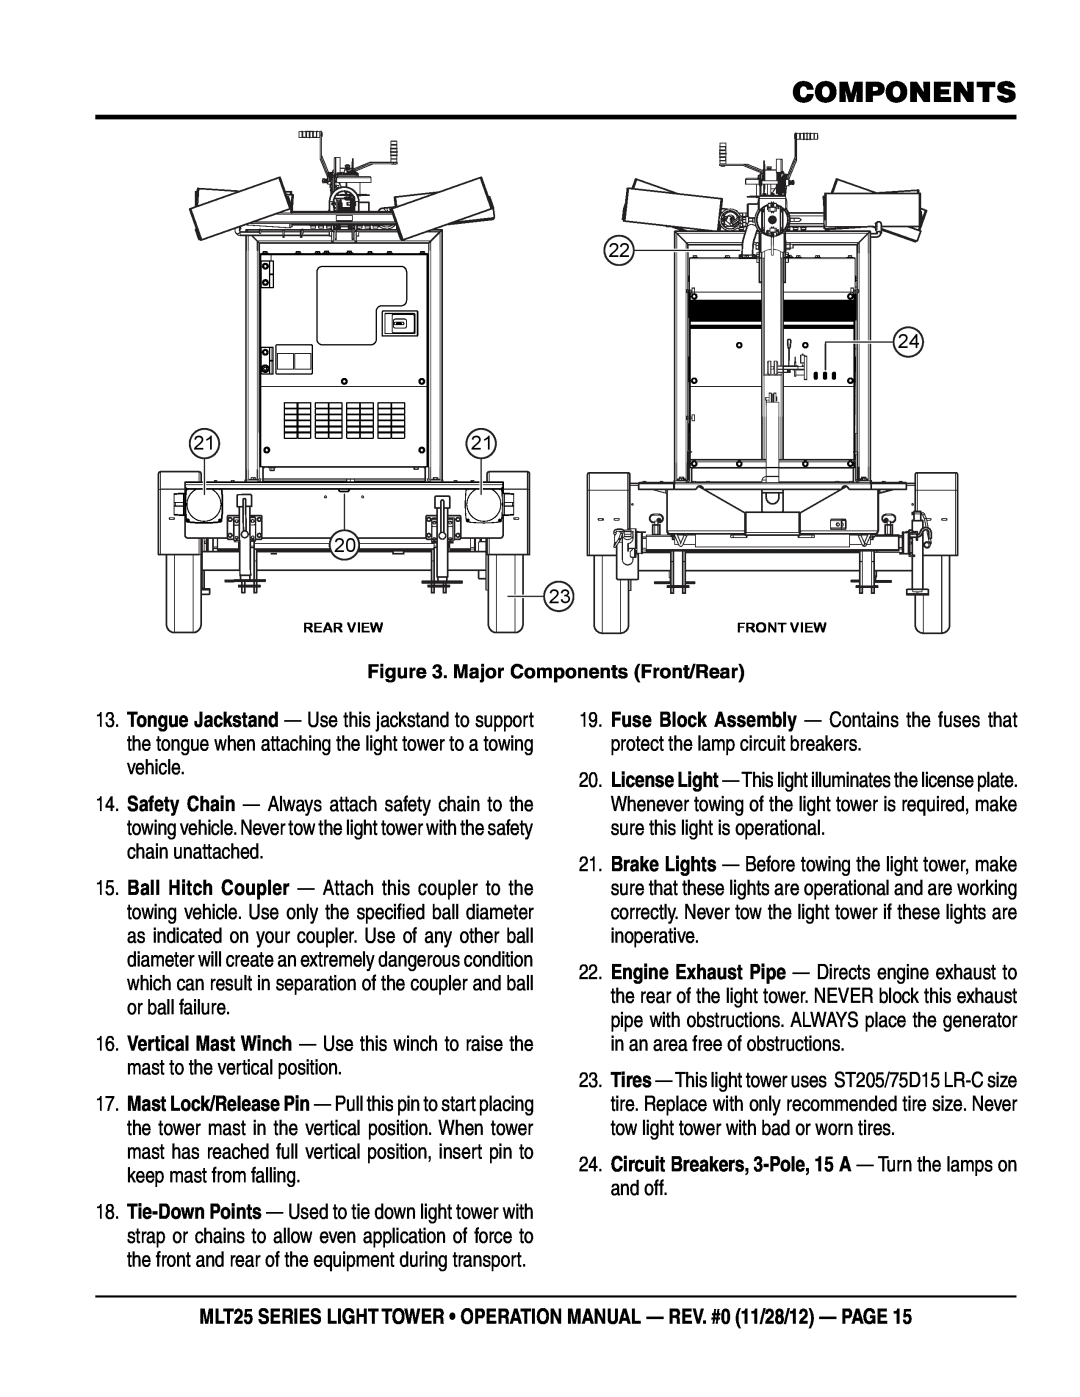 Multiquip MLT25 operation manual components, Circuit Breakers, 3-Pole, 15 A - Turn the lamps on and off 